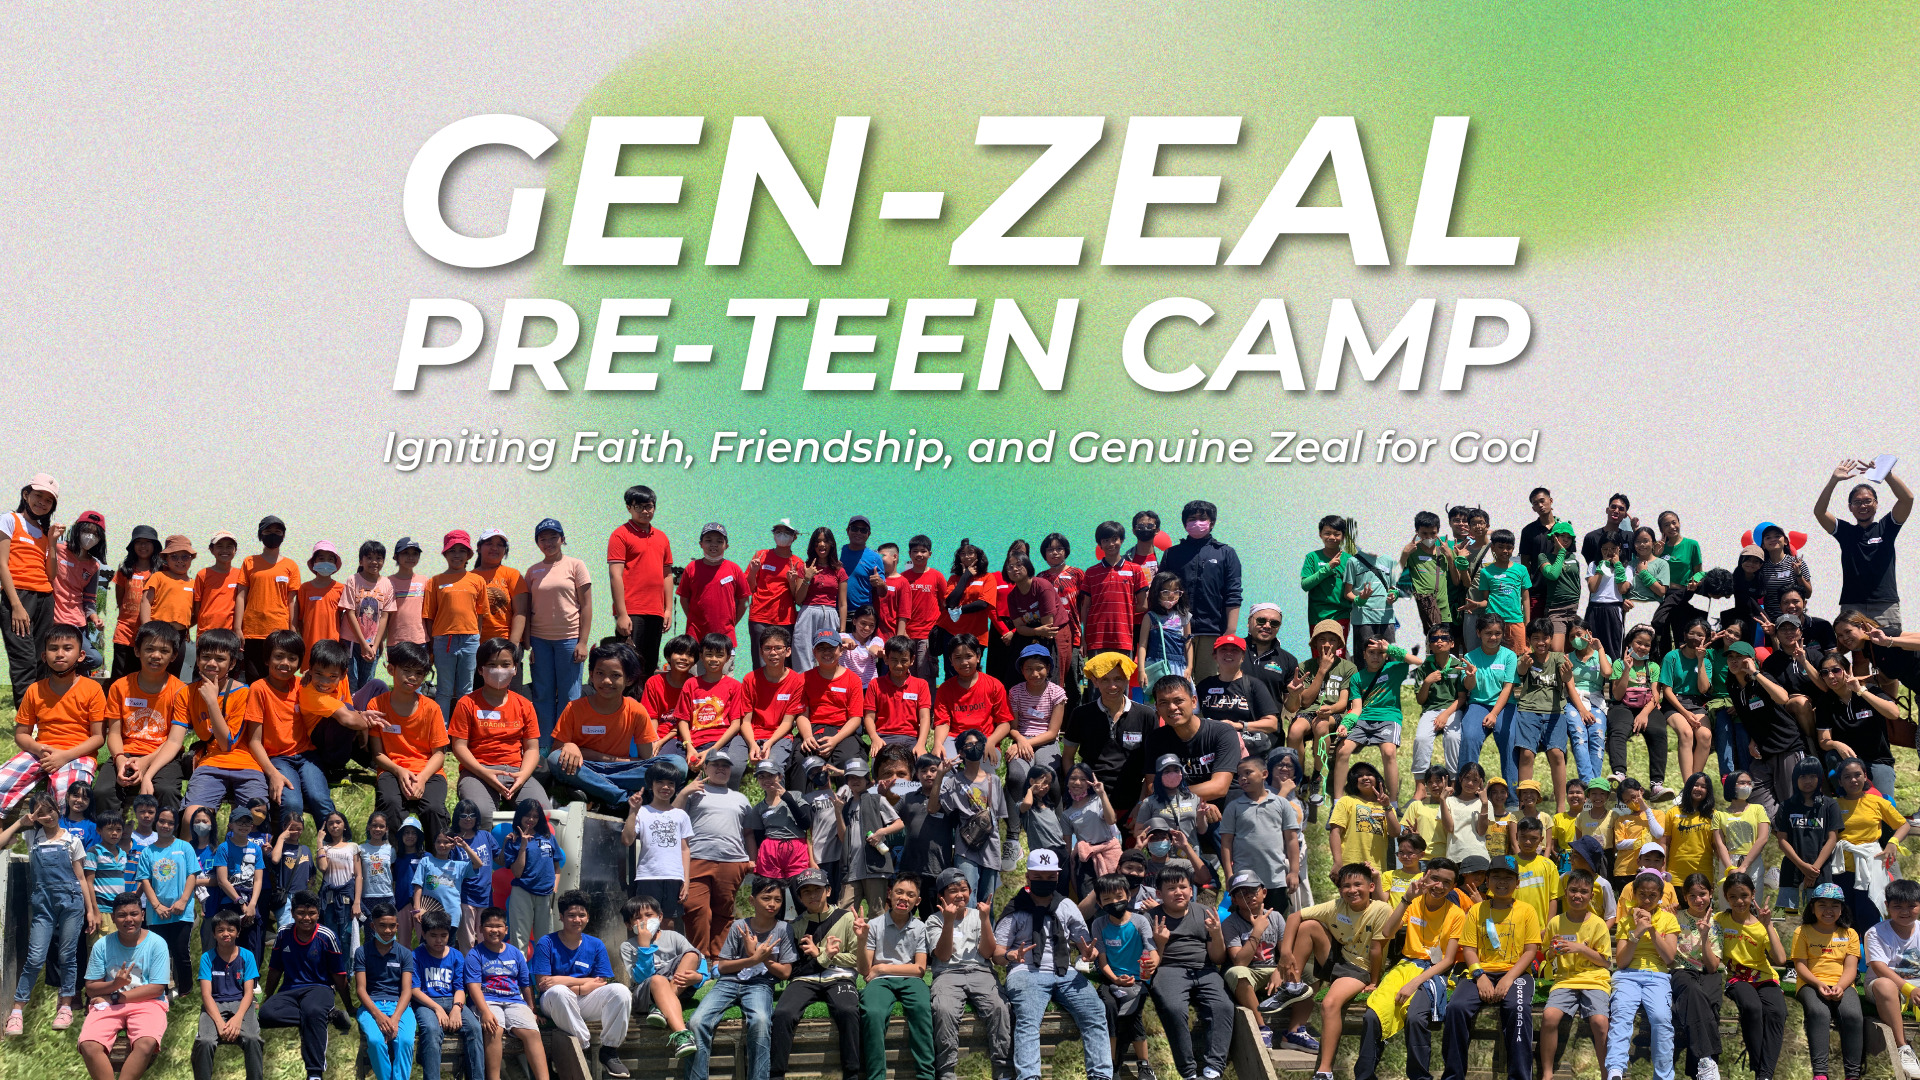 Gen-Zeal Pre-Teen Camp Igniting Faith, Friendship, and Genuine Zeal for God